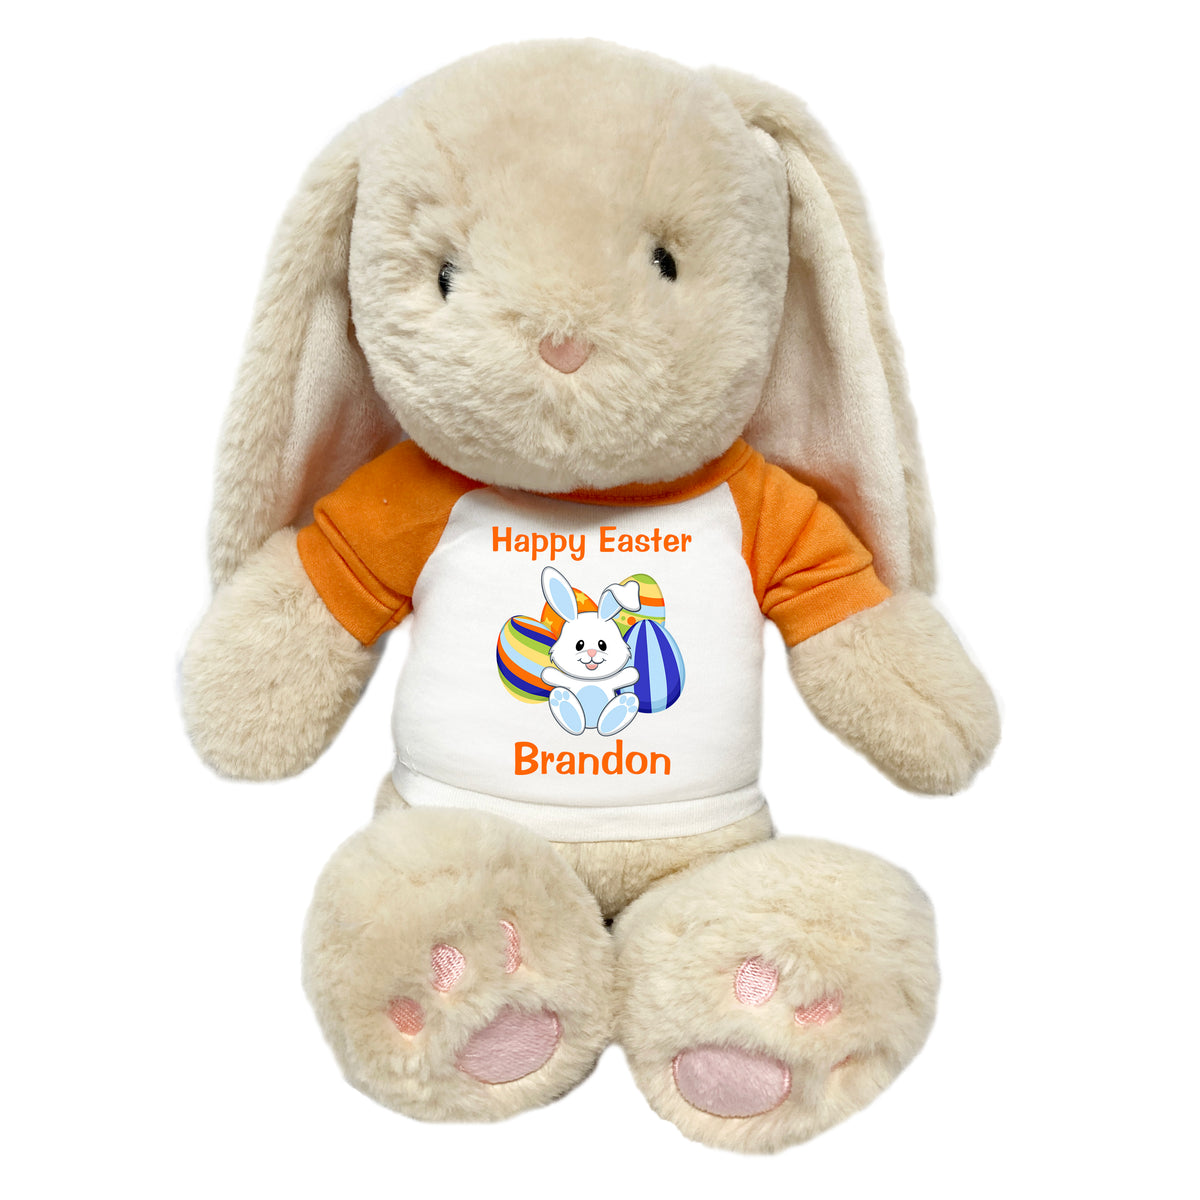 Personalized Easter Bunny - 14" Plush Creme Brulee Bunny Rabbit with Easter Egg Design - Orange Shirt